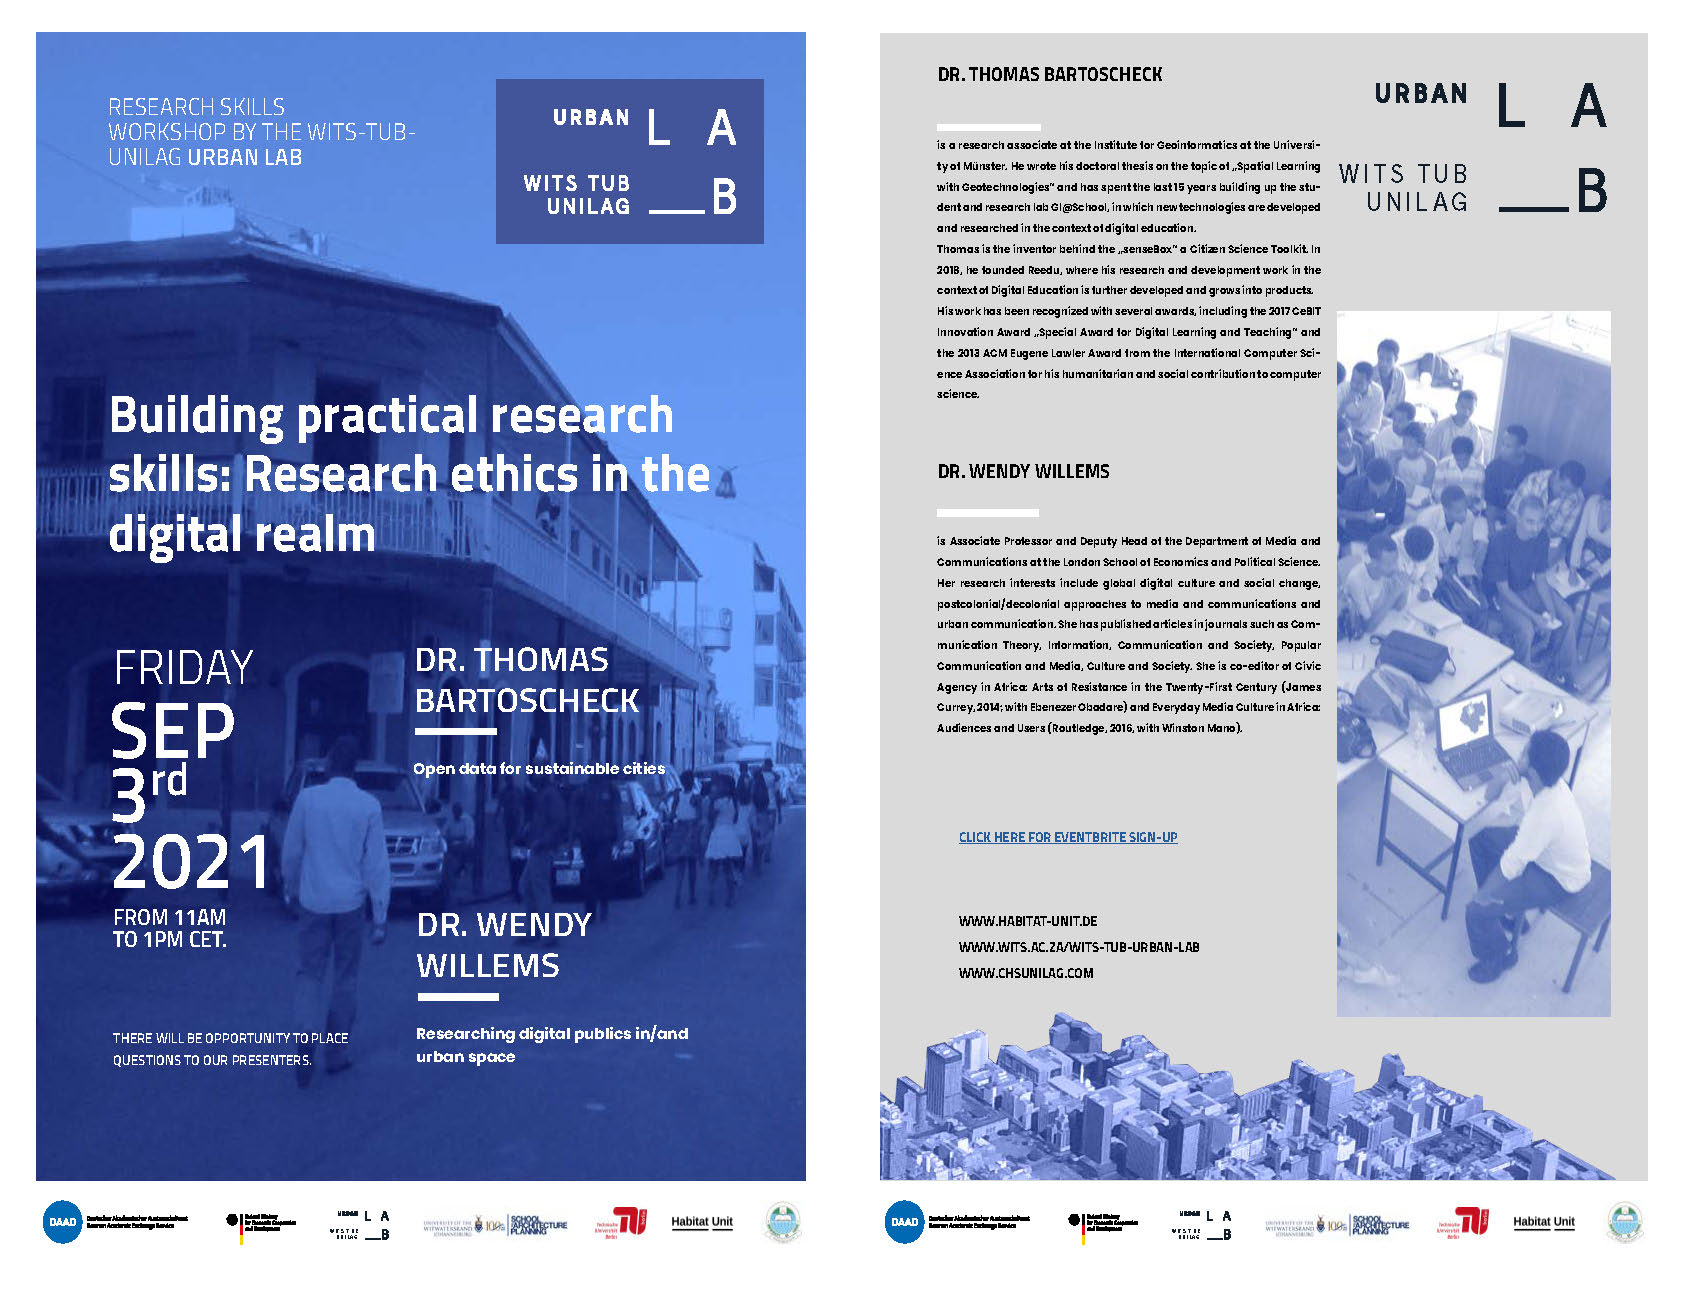 Building practical research skills: Research ethics in the digital realm